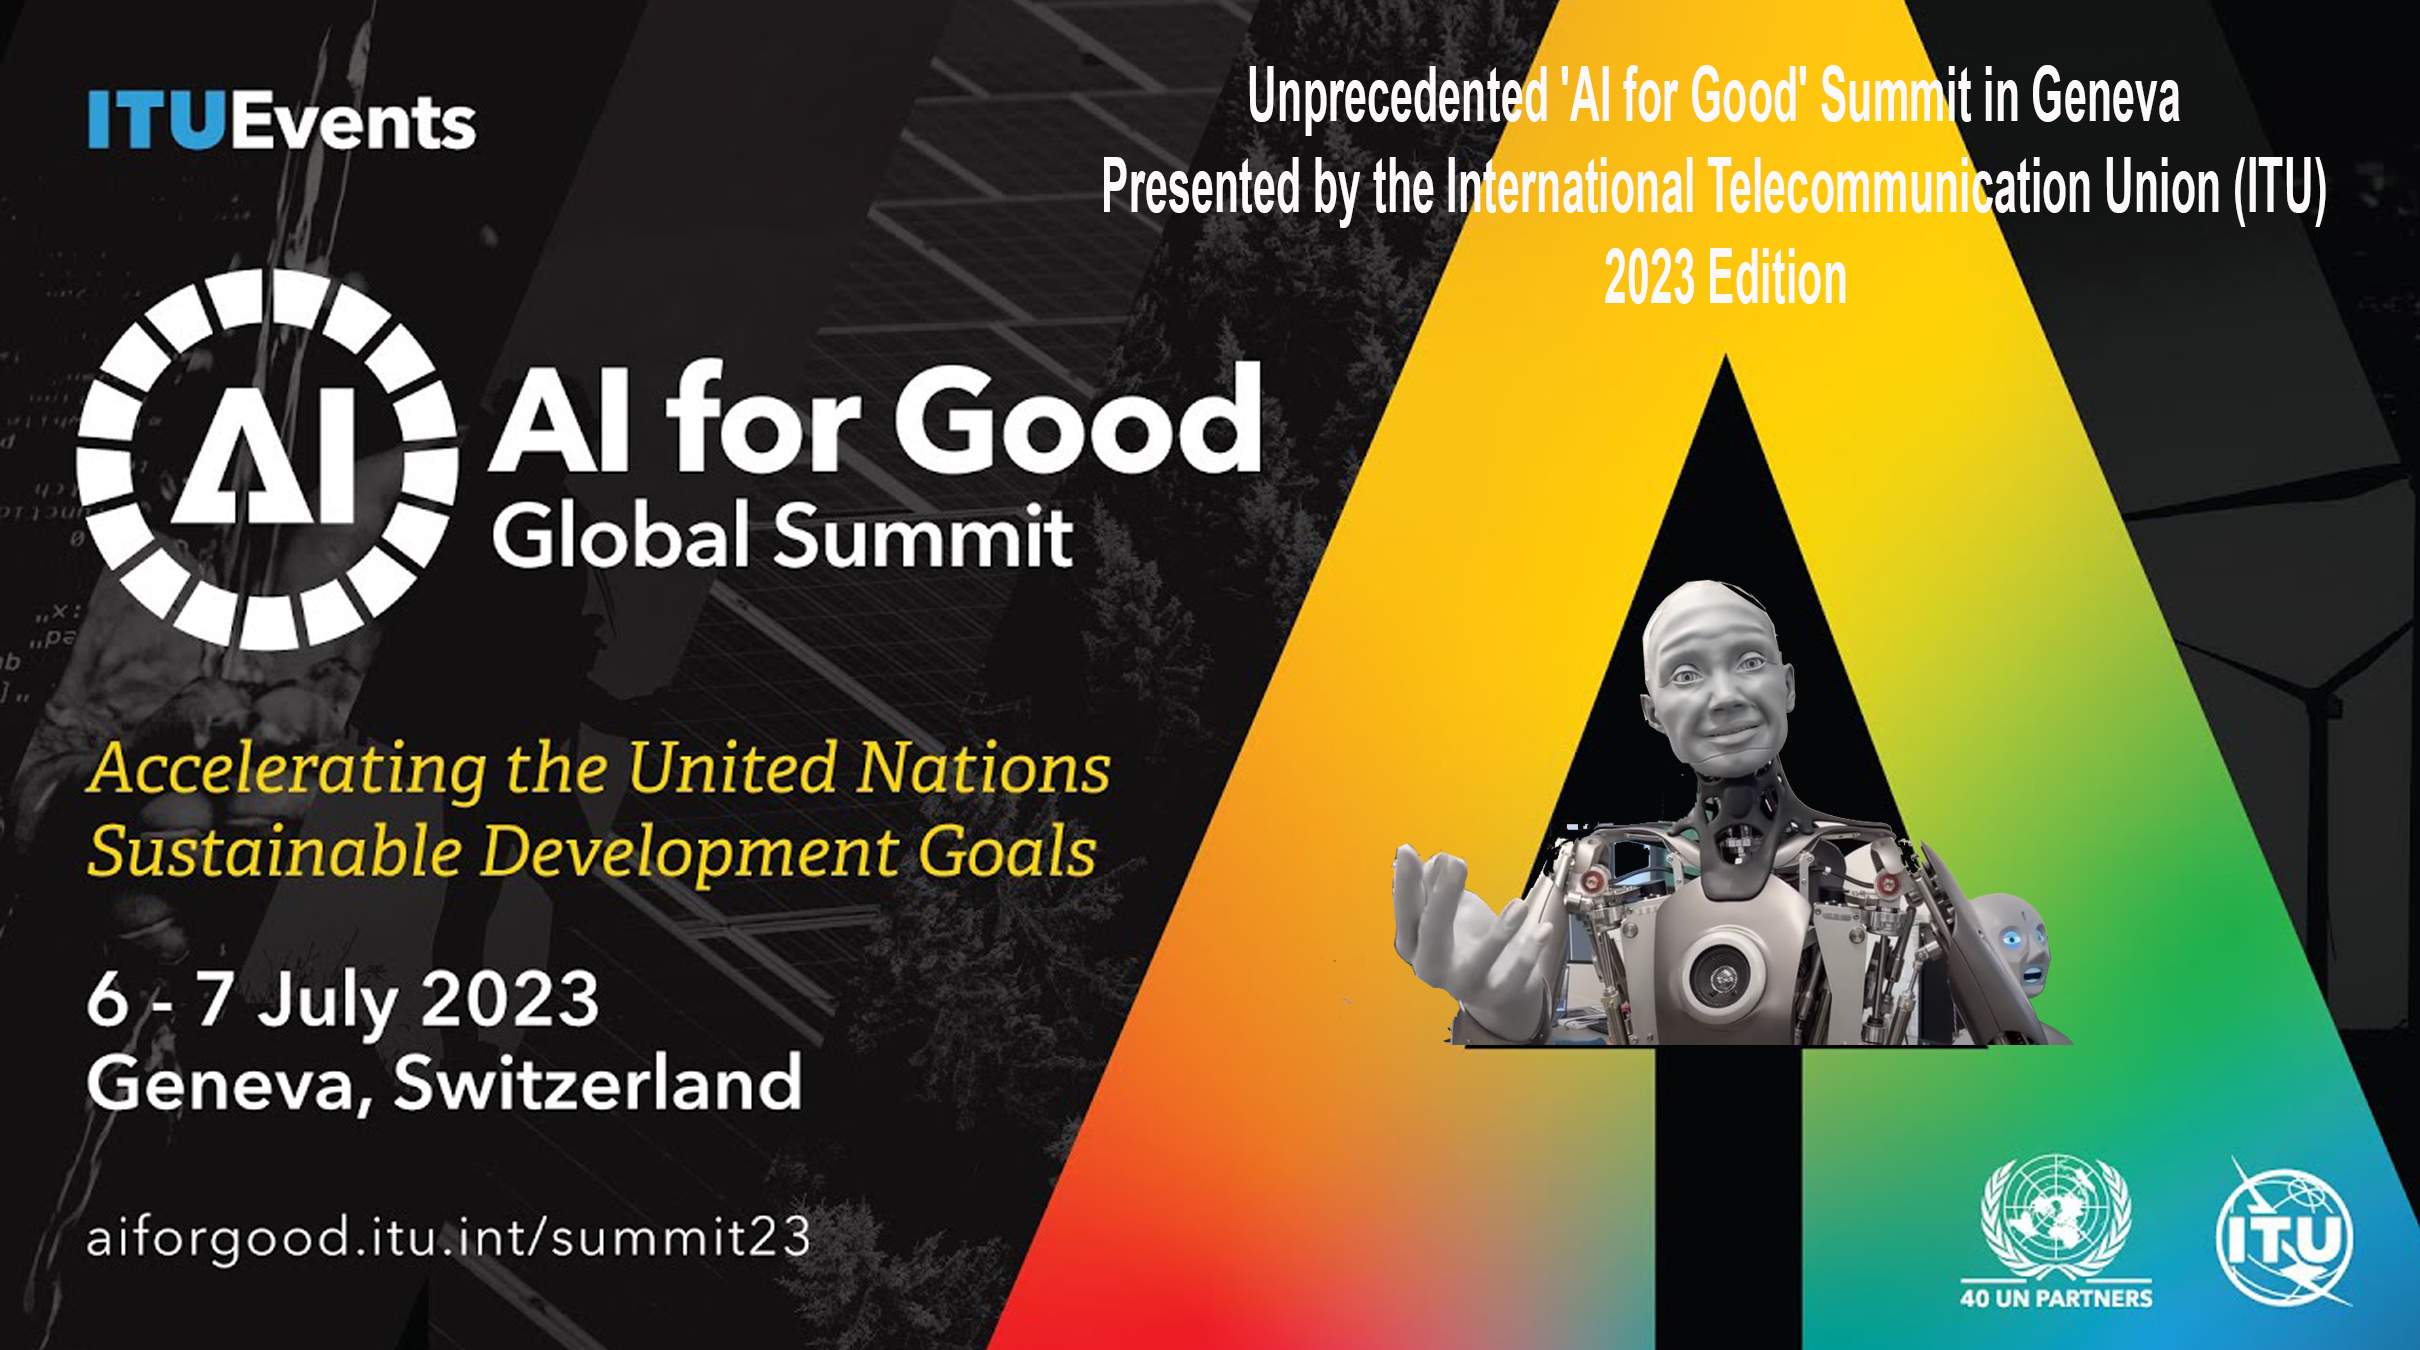 AFRICA-VOGUE-COVER-AFRICA-VOGUE-COVER--Unprecedented-AI-for-Good-Summit-in-Geneva--Presented-by-the-International-Telecommunication-Union-ITU--2023-Edition-DN-AFRICA-Media-Partner